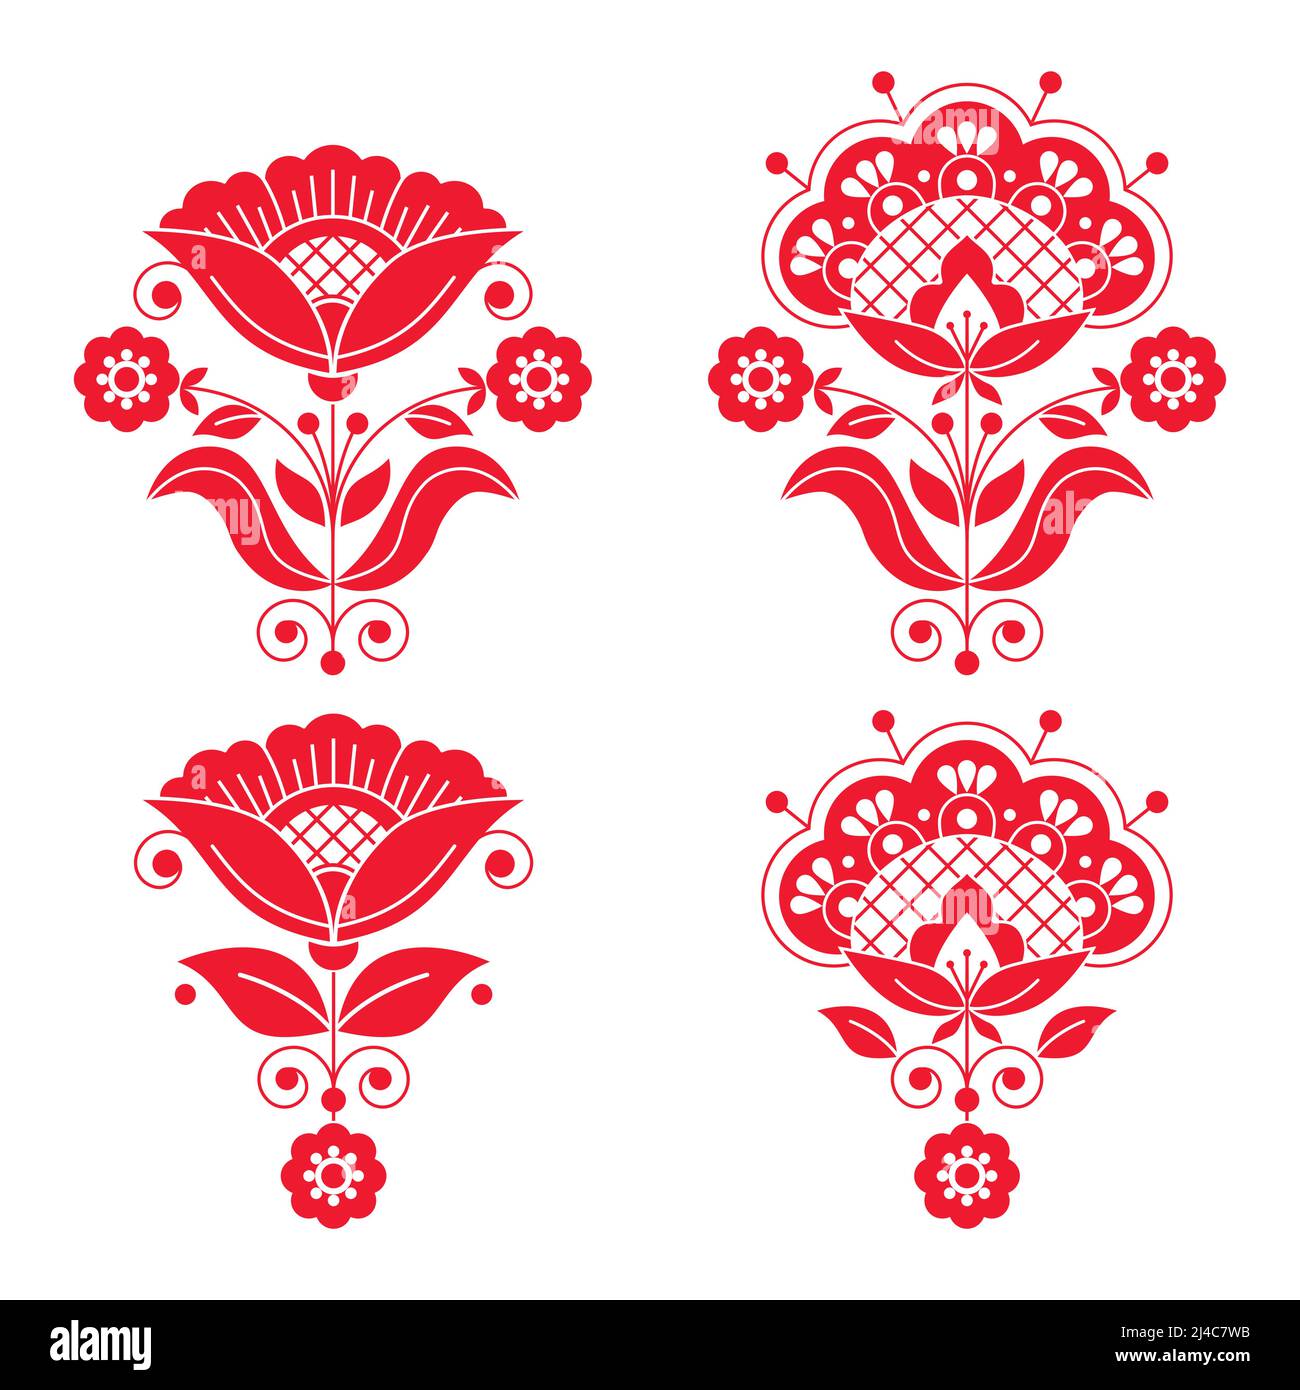 Scandinavian floral folk art vector red design set with flowers, leaves and swirls inspired by traditional embroidery patterns Stock Vector